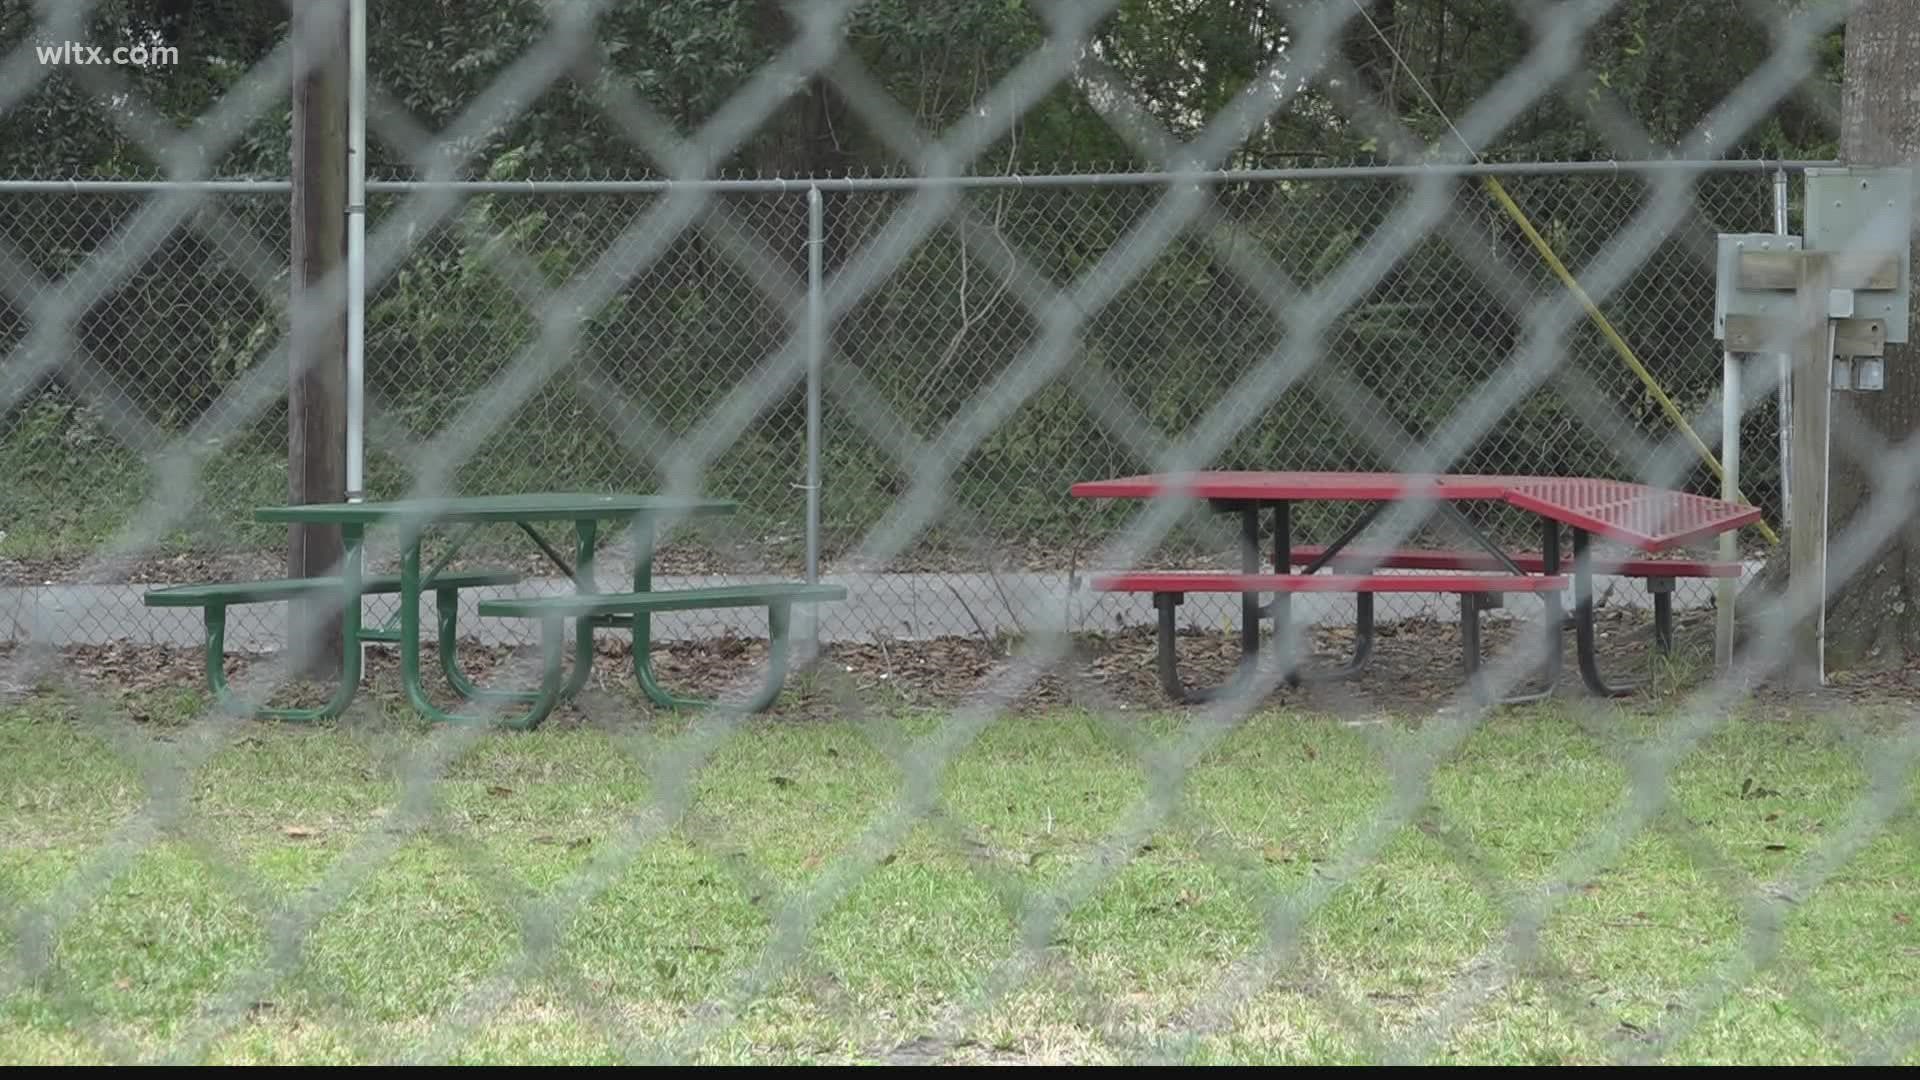 The park in Bowman, SC is going to get a new look, but the town wants input from the public.